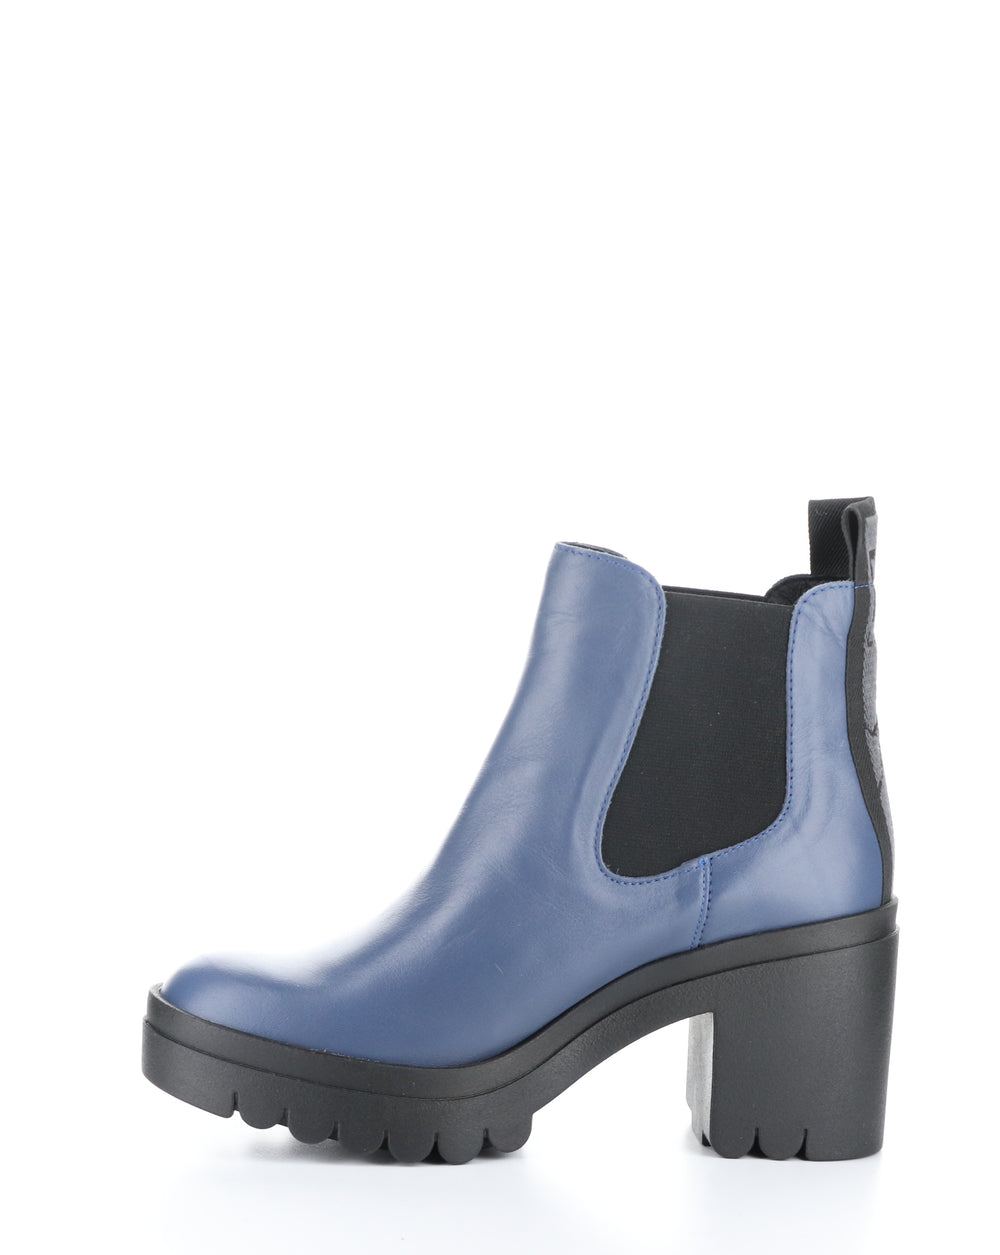 TOPE520FLY 015 DENIM Elasticated Boots